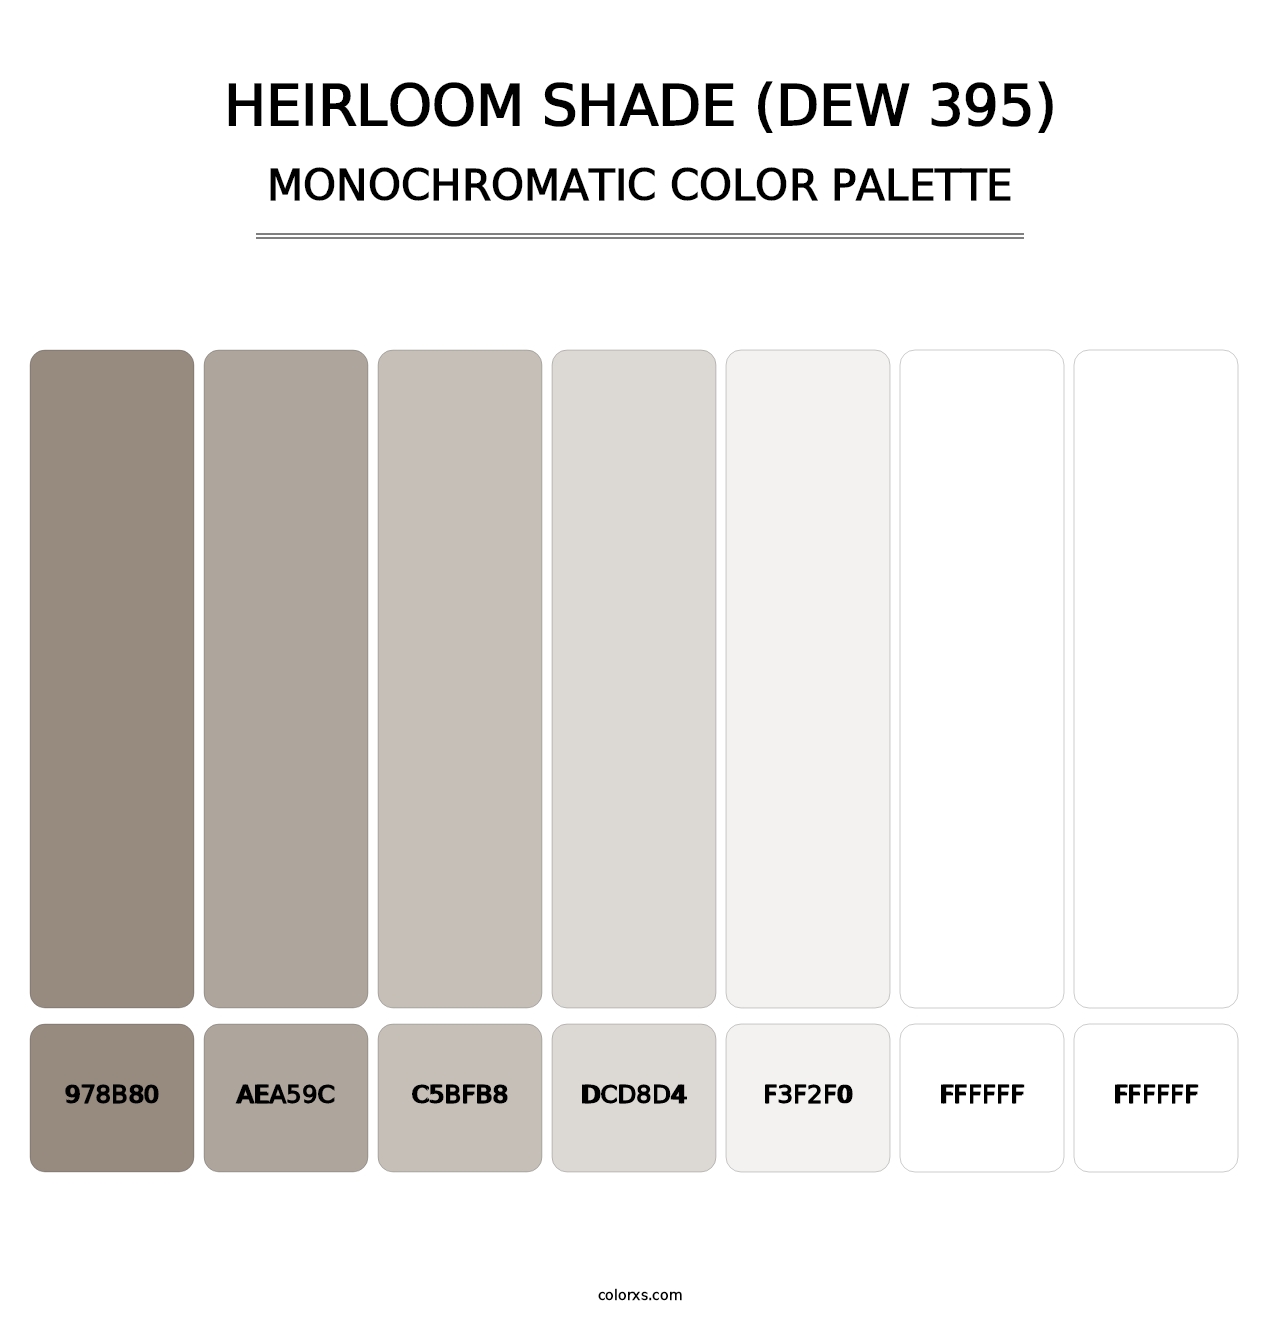 Heirloom Shade (DEW 395) - Monochromatic Color Palette